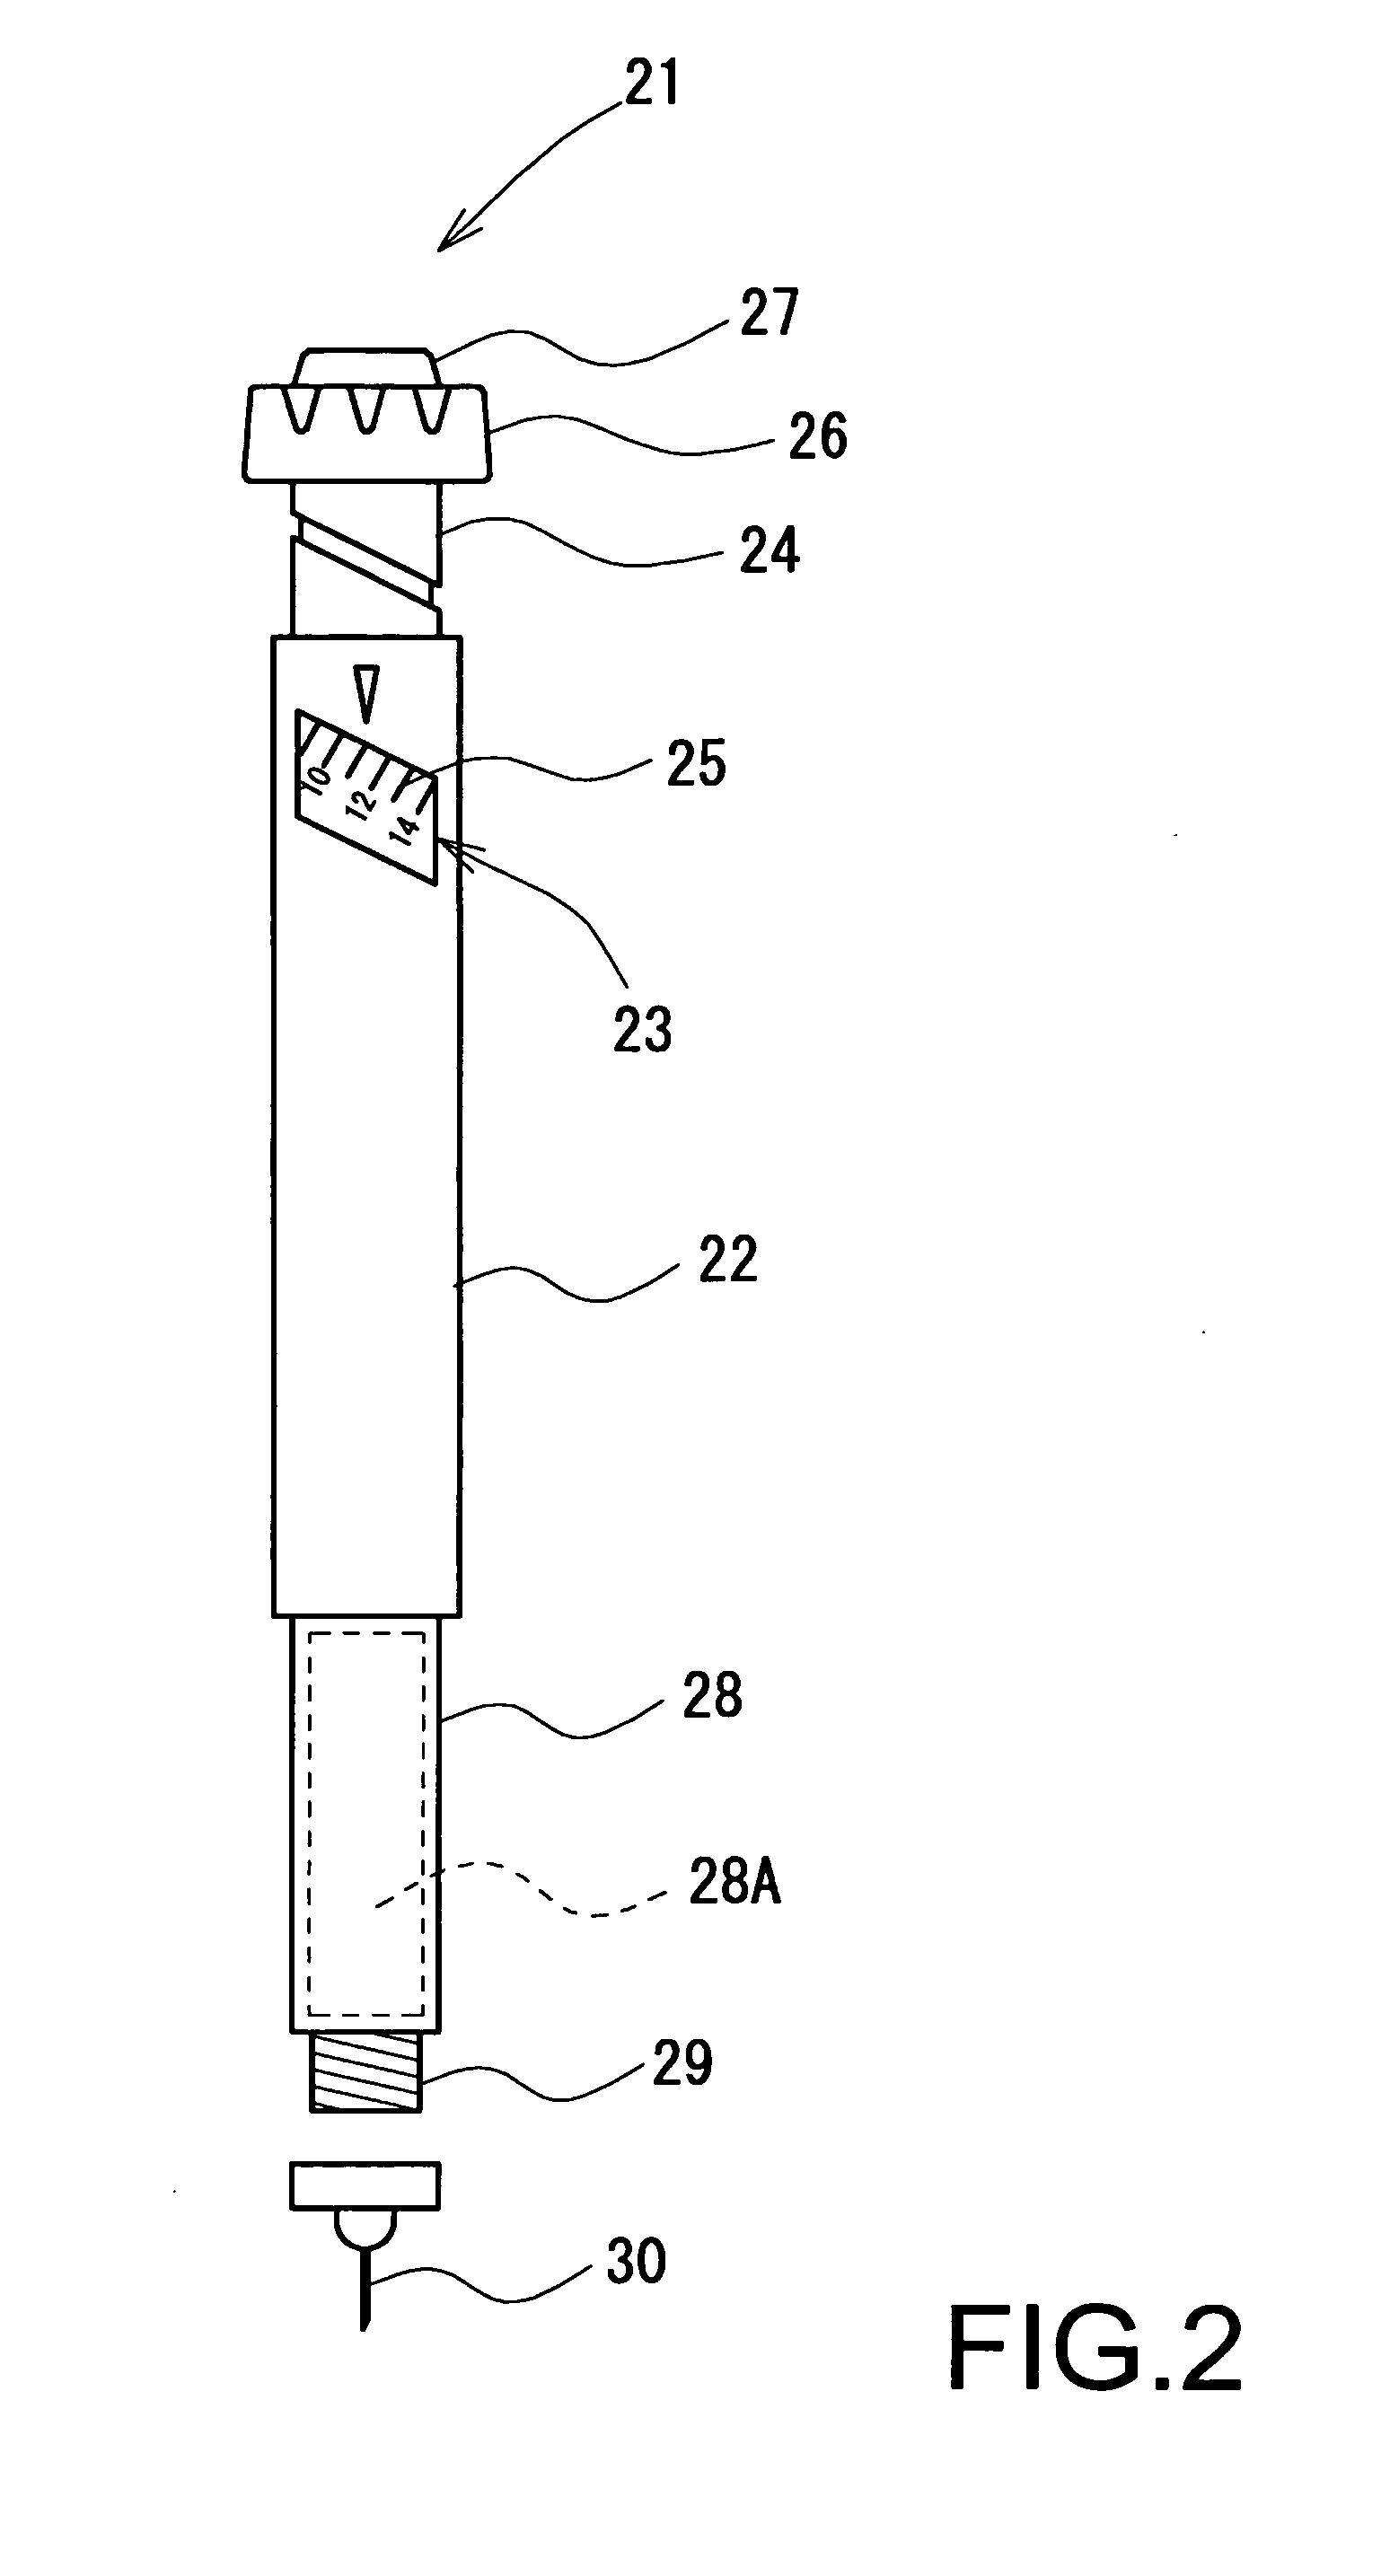 Unit-matching assisting tool for quantitative injection of medicine and method for adjusting injection rate of medicine